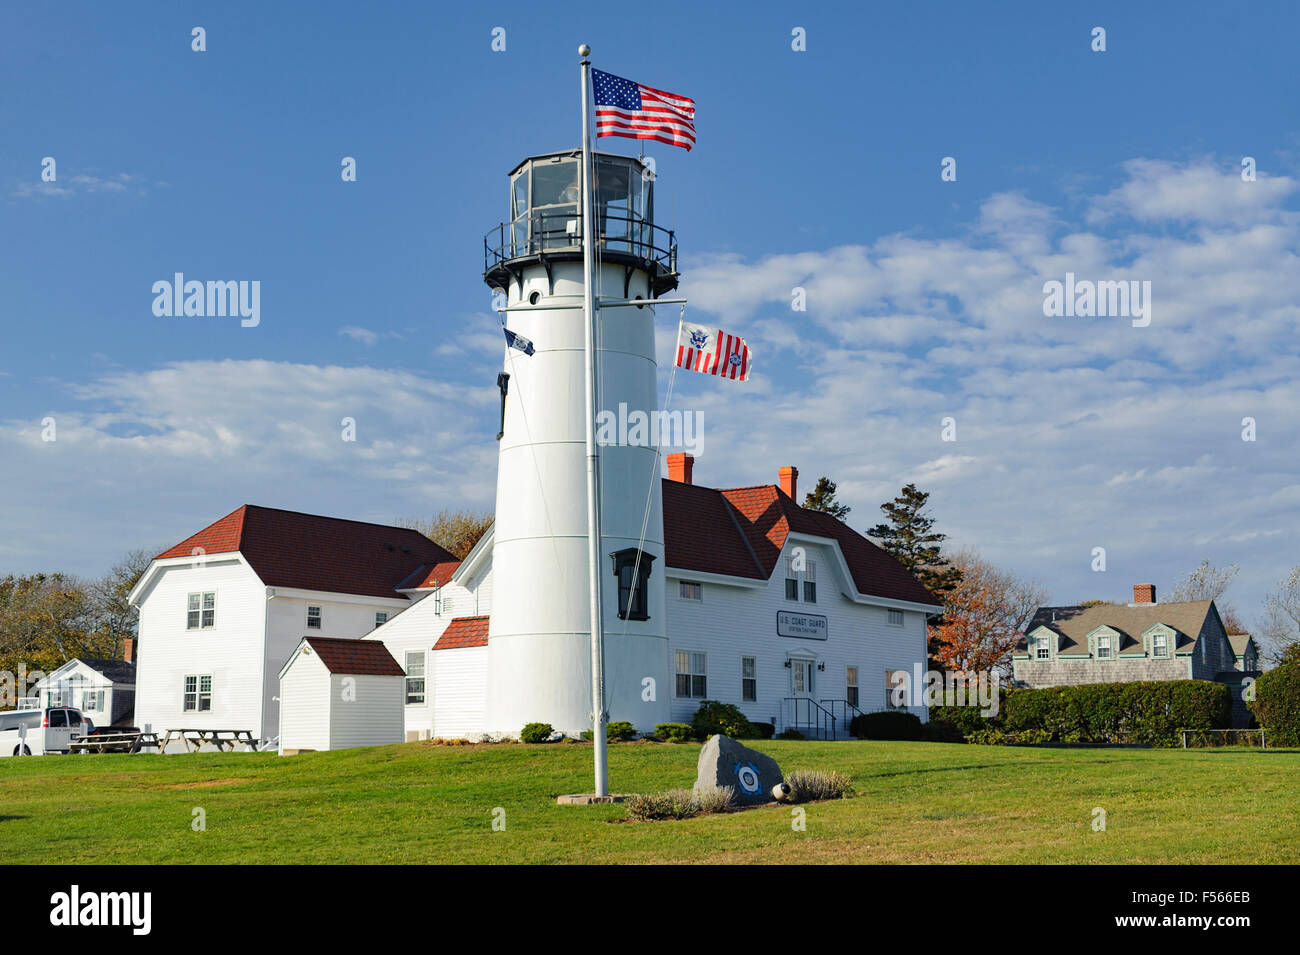 The Chatham Lighthouse in Chatham Massachusetts. This Cape Cod lighthouse is a historical landmark managed by the United States Coast Guard USCG Stock Photo